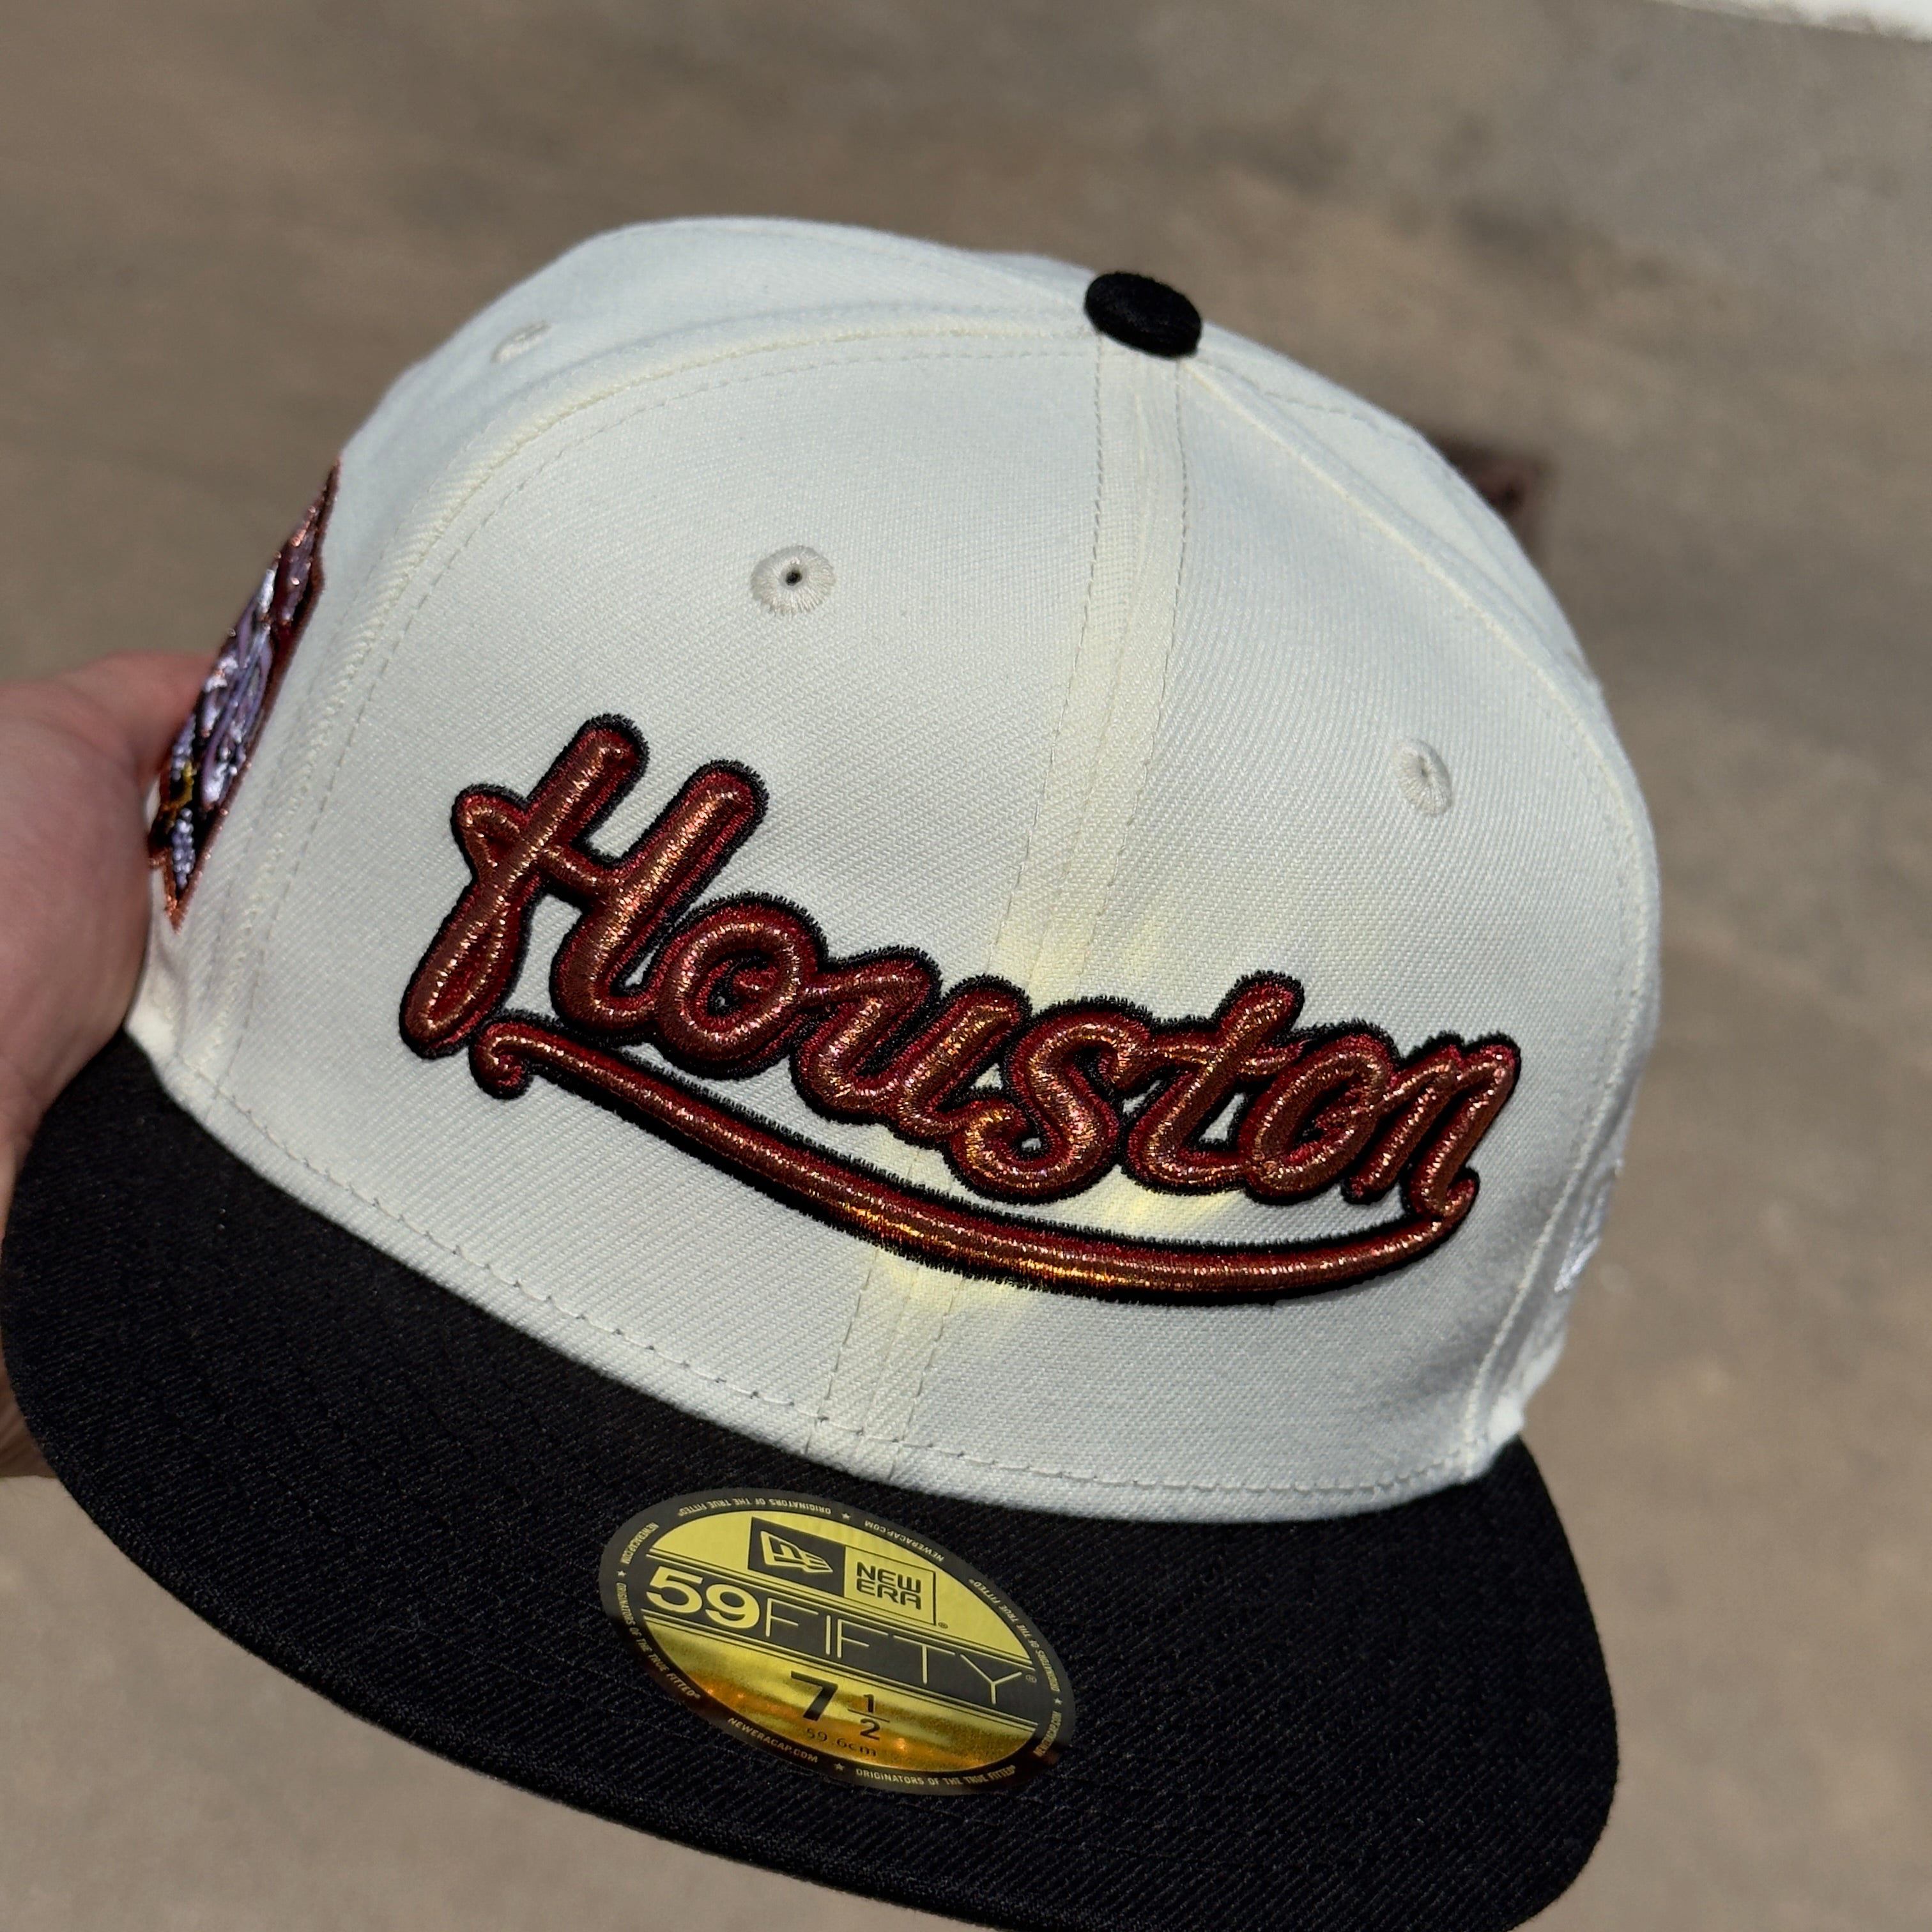 1/2 NEW Chrome Houston Astros 50 Years Copper  59fifty New Era Fitted Hat Cap